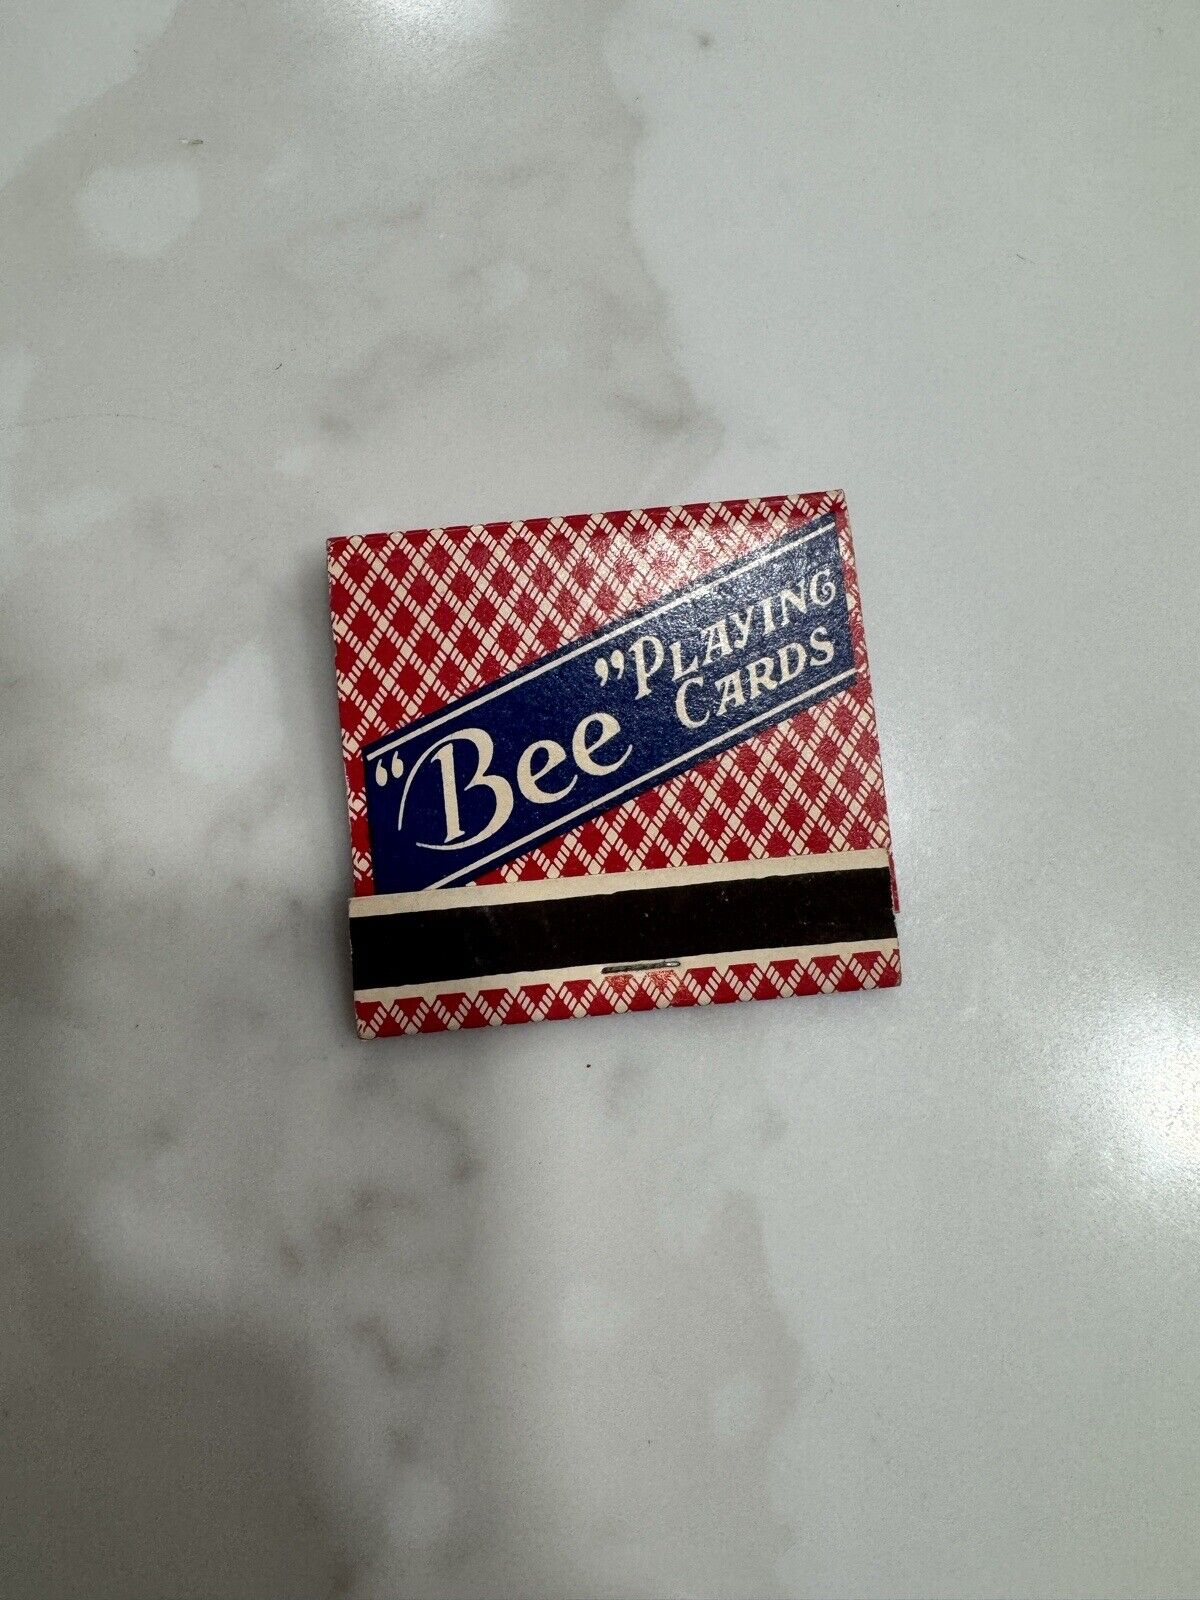 1940's/50s Matchbook. Bee Playing Cards. Vintage Matchbook.